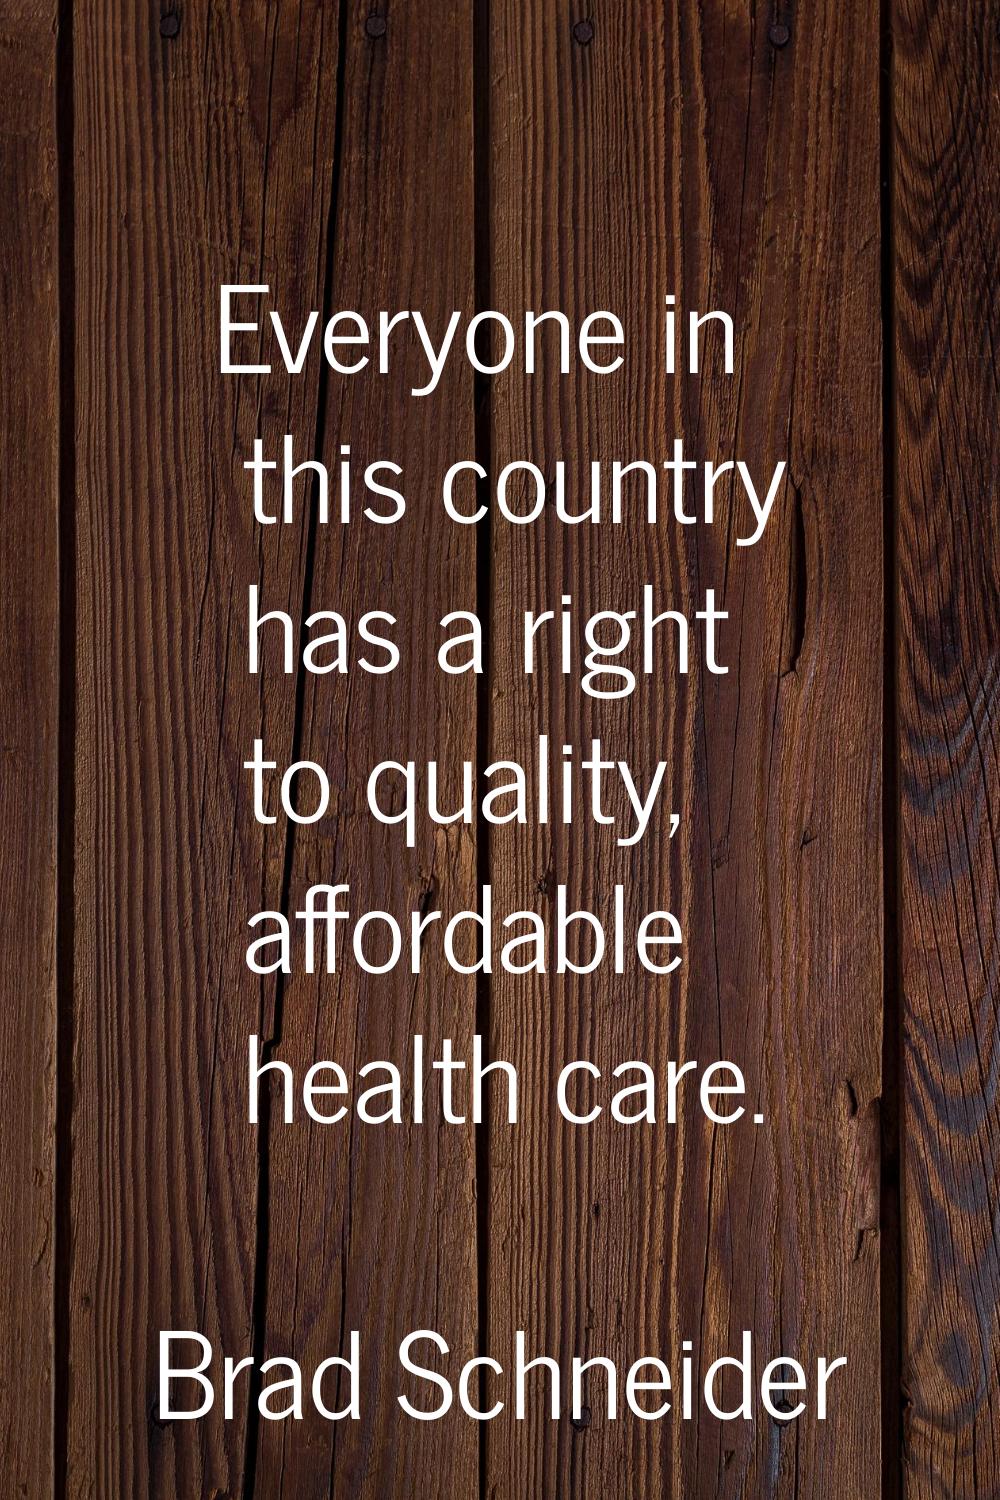 Everyone in this country has a right to quality, affordable health care.